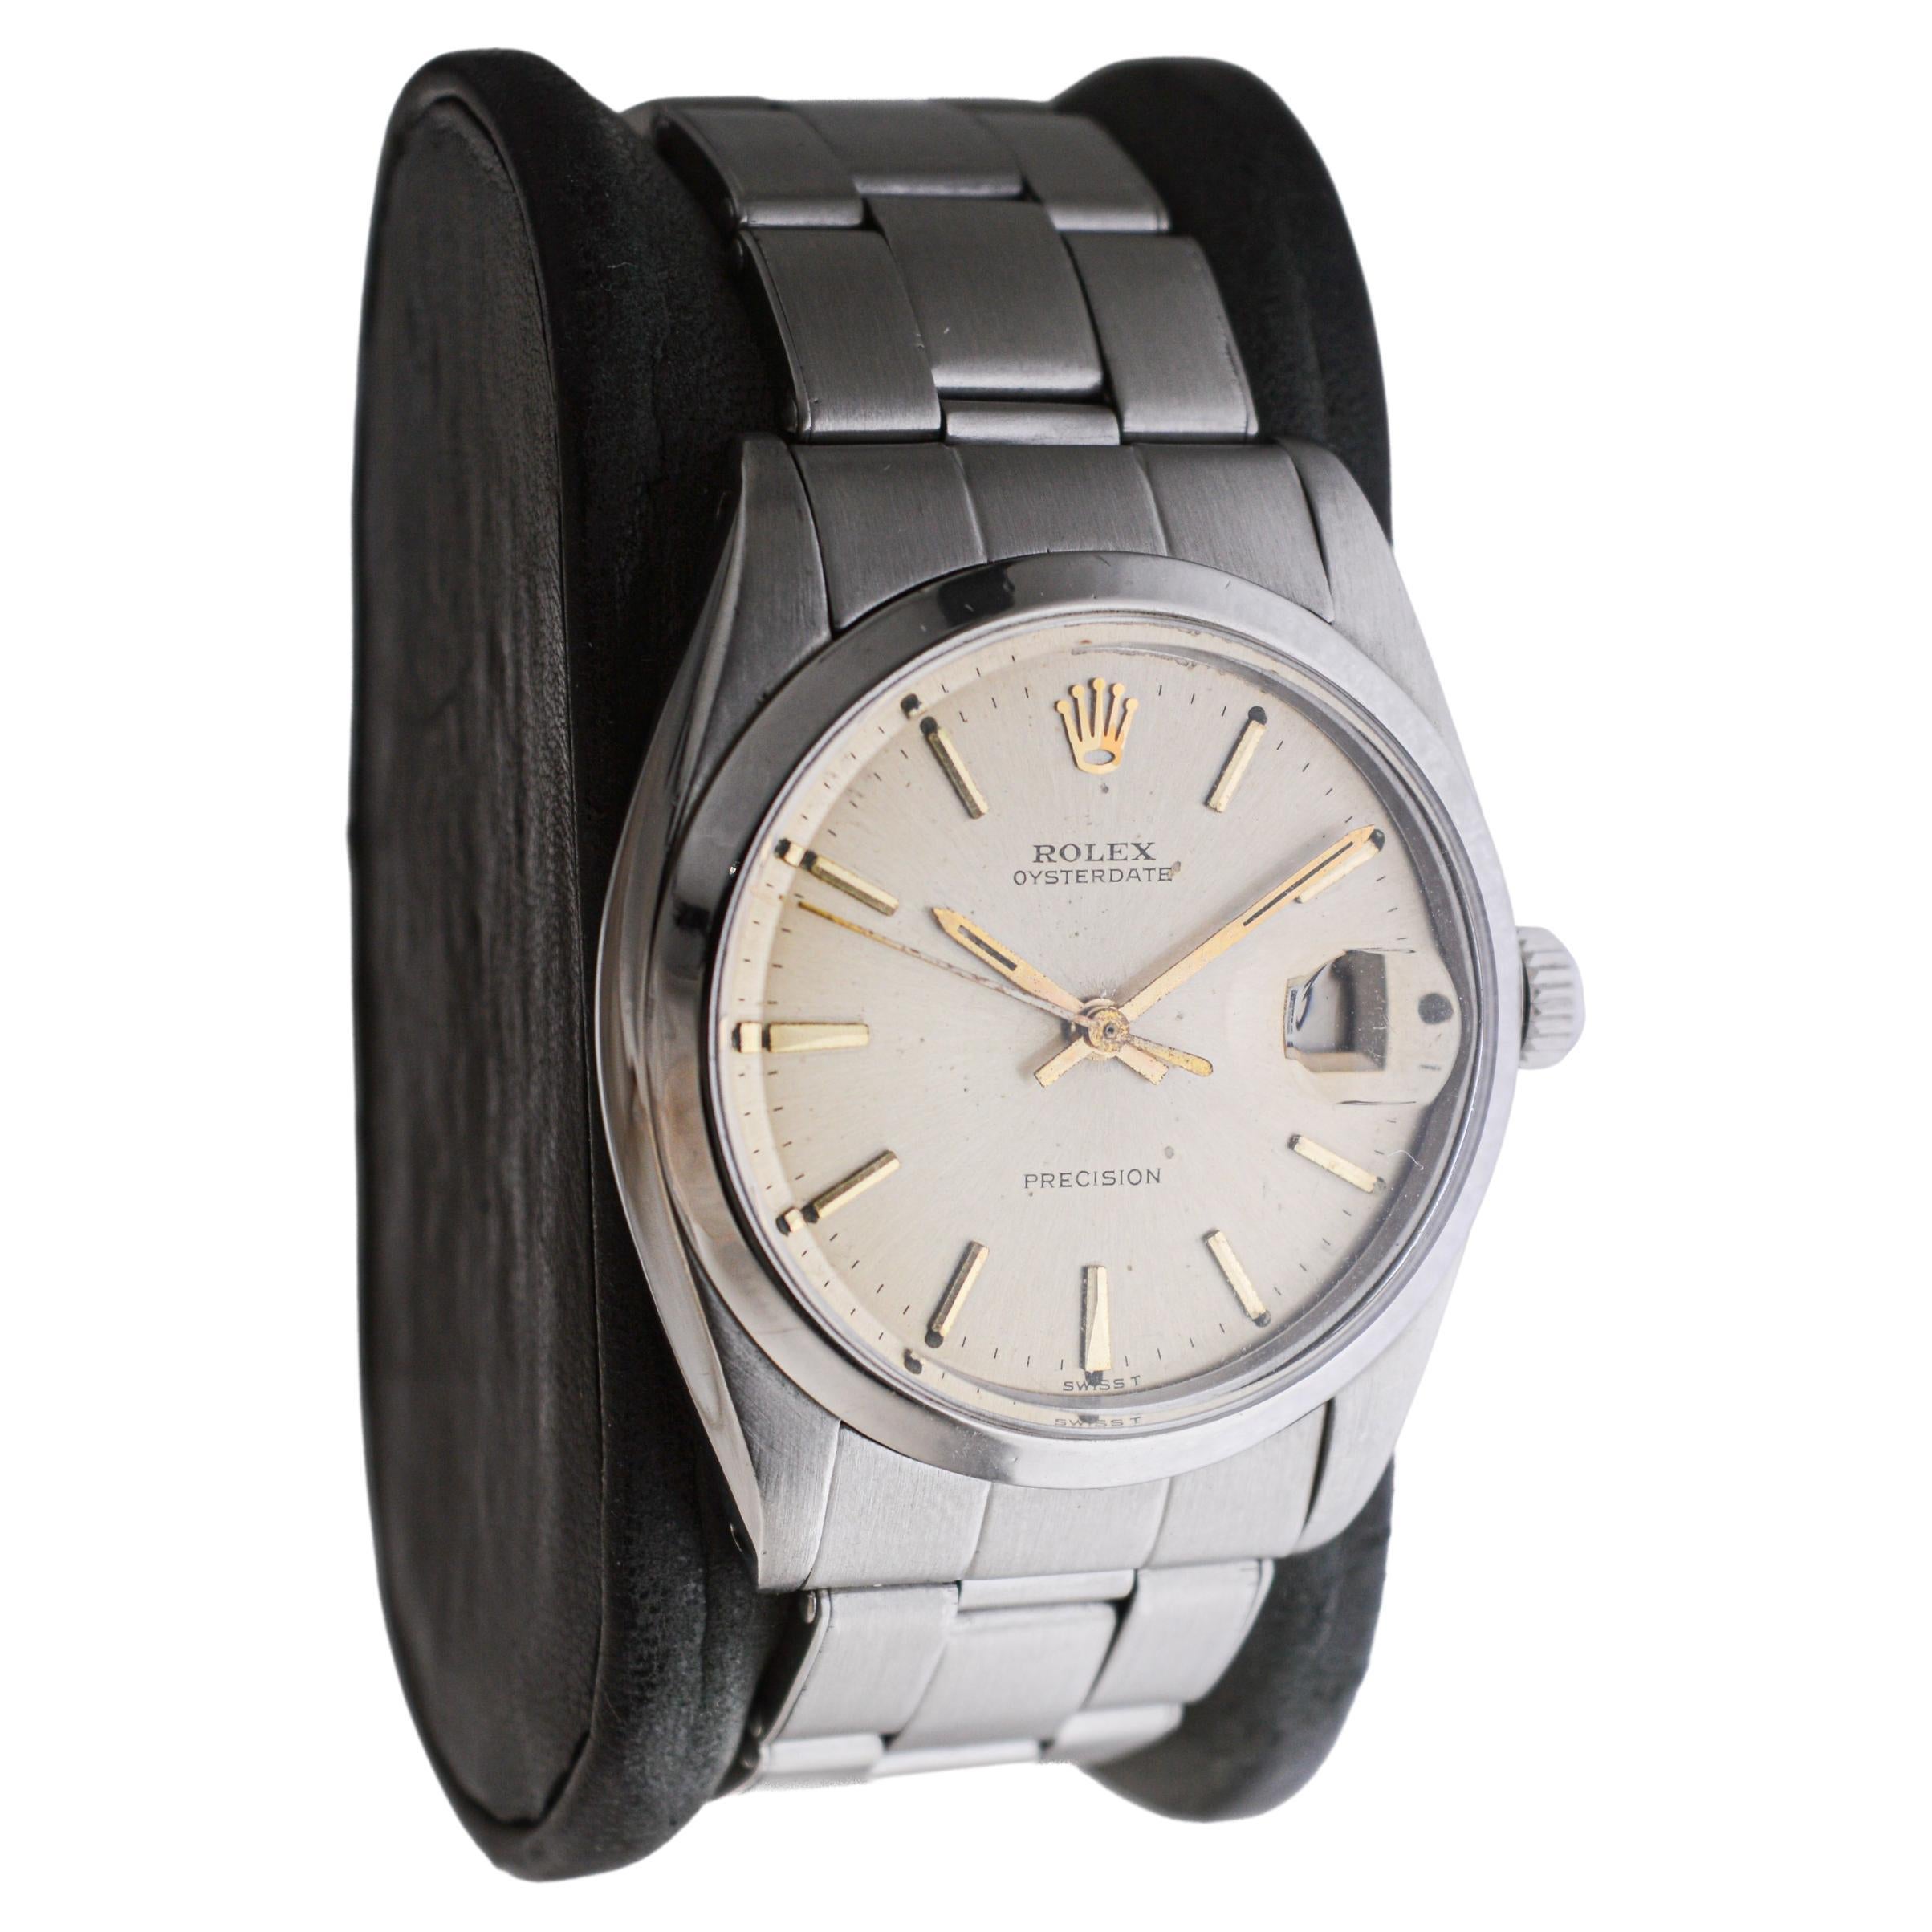 FACTORY / HOUSE: Rolex Watch Company
STYLE / REFERENCE: Oyster Date / Reference 6694
METAL / MATERIAL: Stainless Steel
CIRCA / YEAR: 1960's
DIMENSIONS / SIZE: Length 42mm X Diameter 35mm
MOVEMENT / CALIBER: Manual Winding / 17 Jewels / Caliber